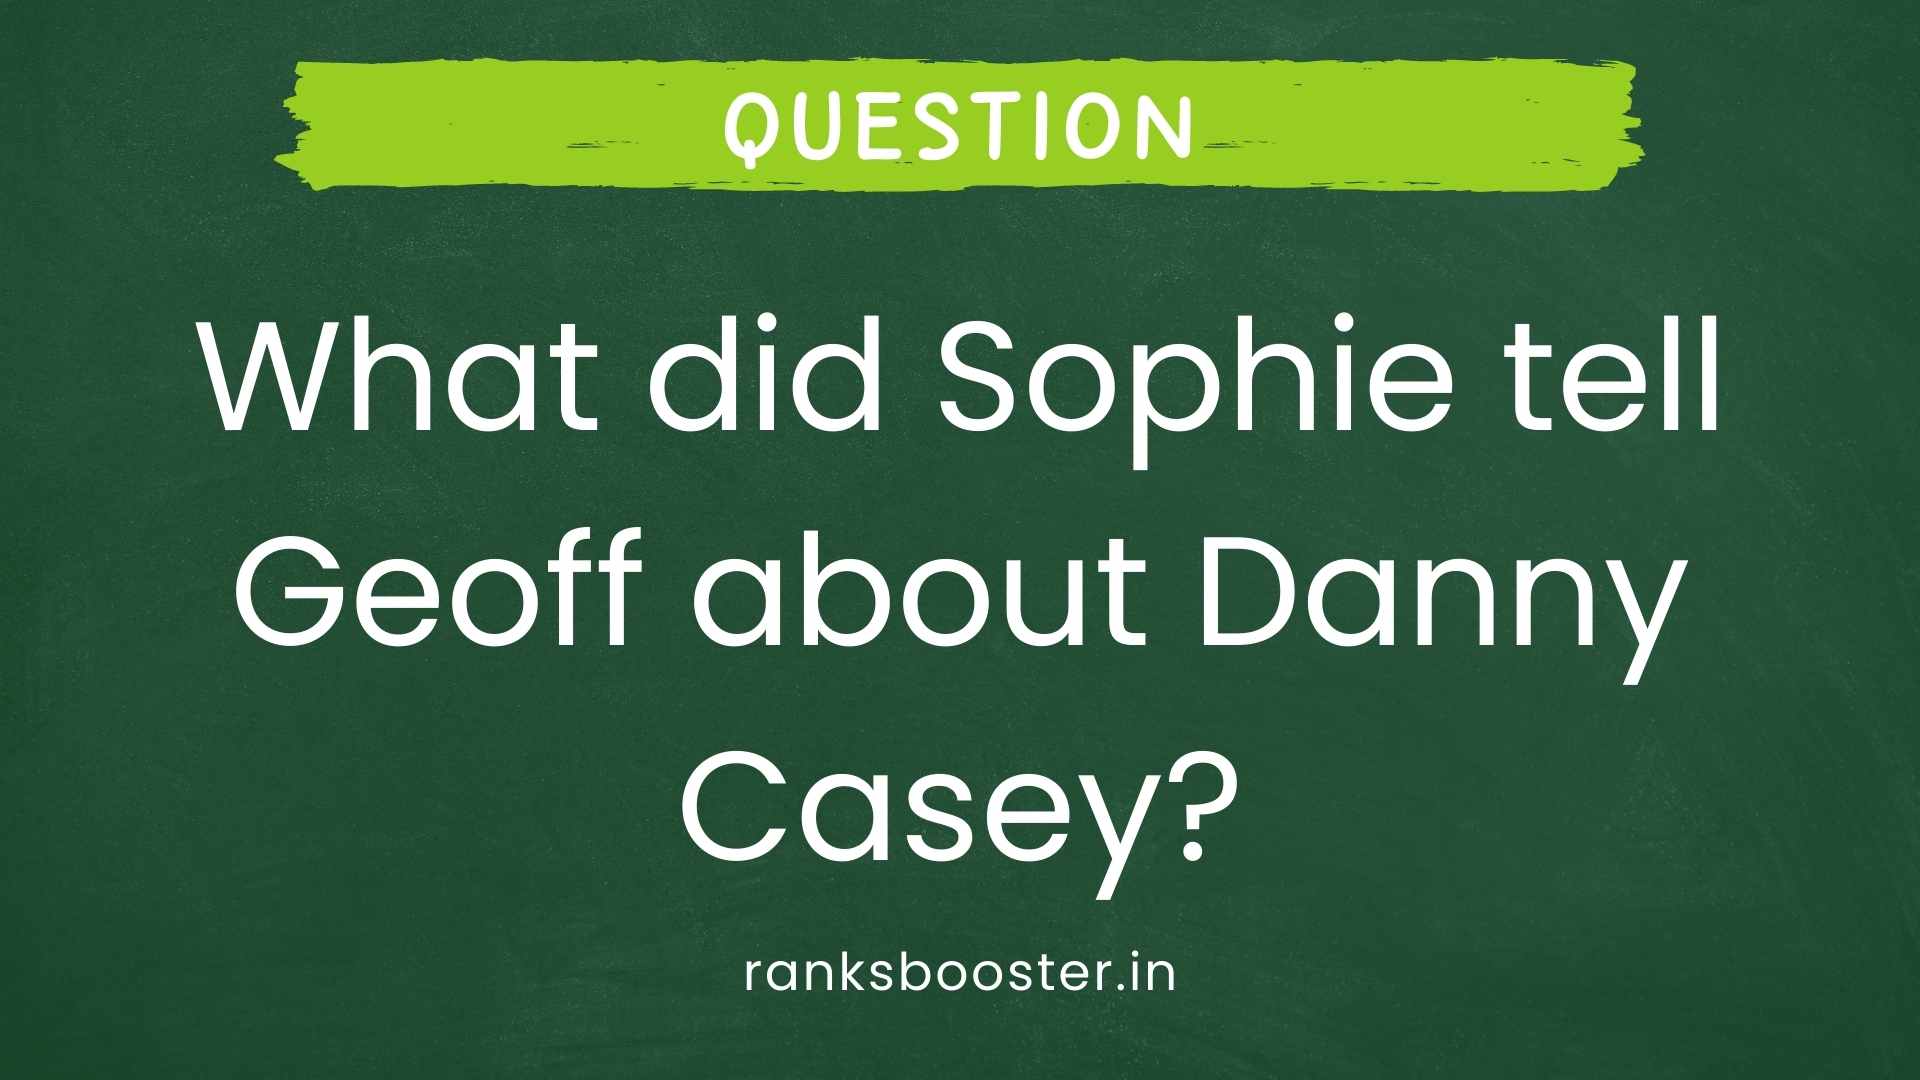 Question: What did Sophie tell Geoff about Danny Casey?